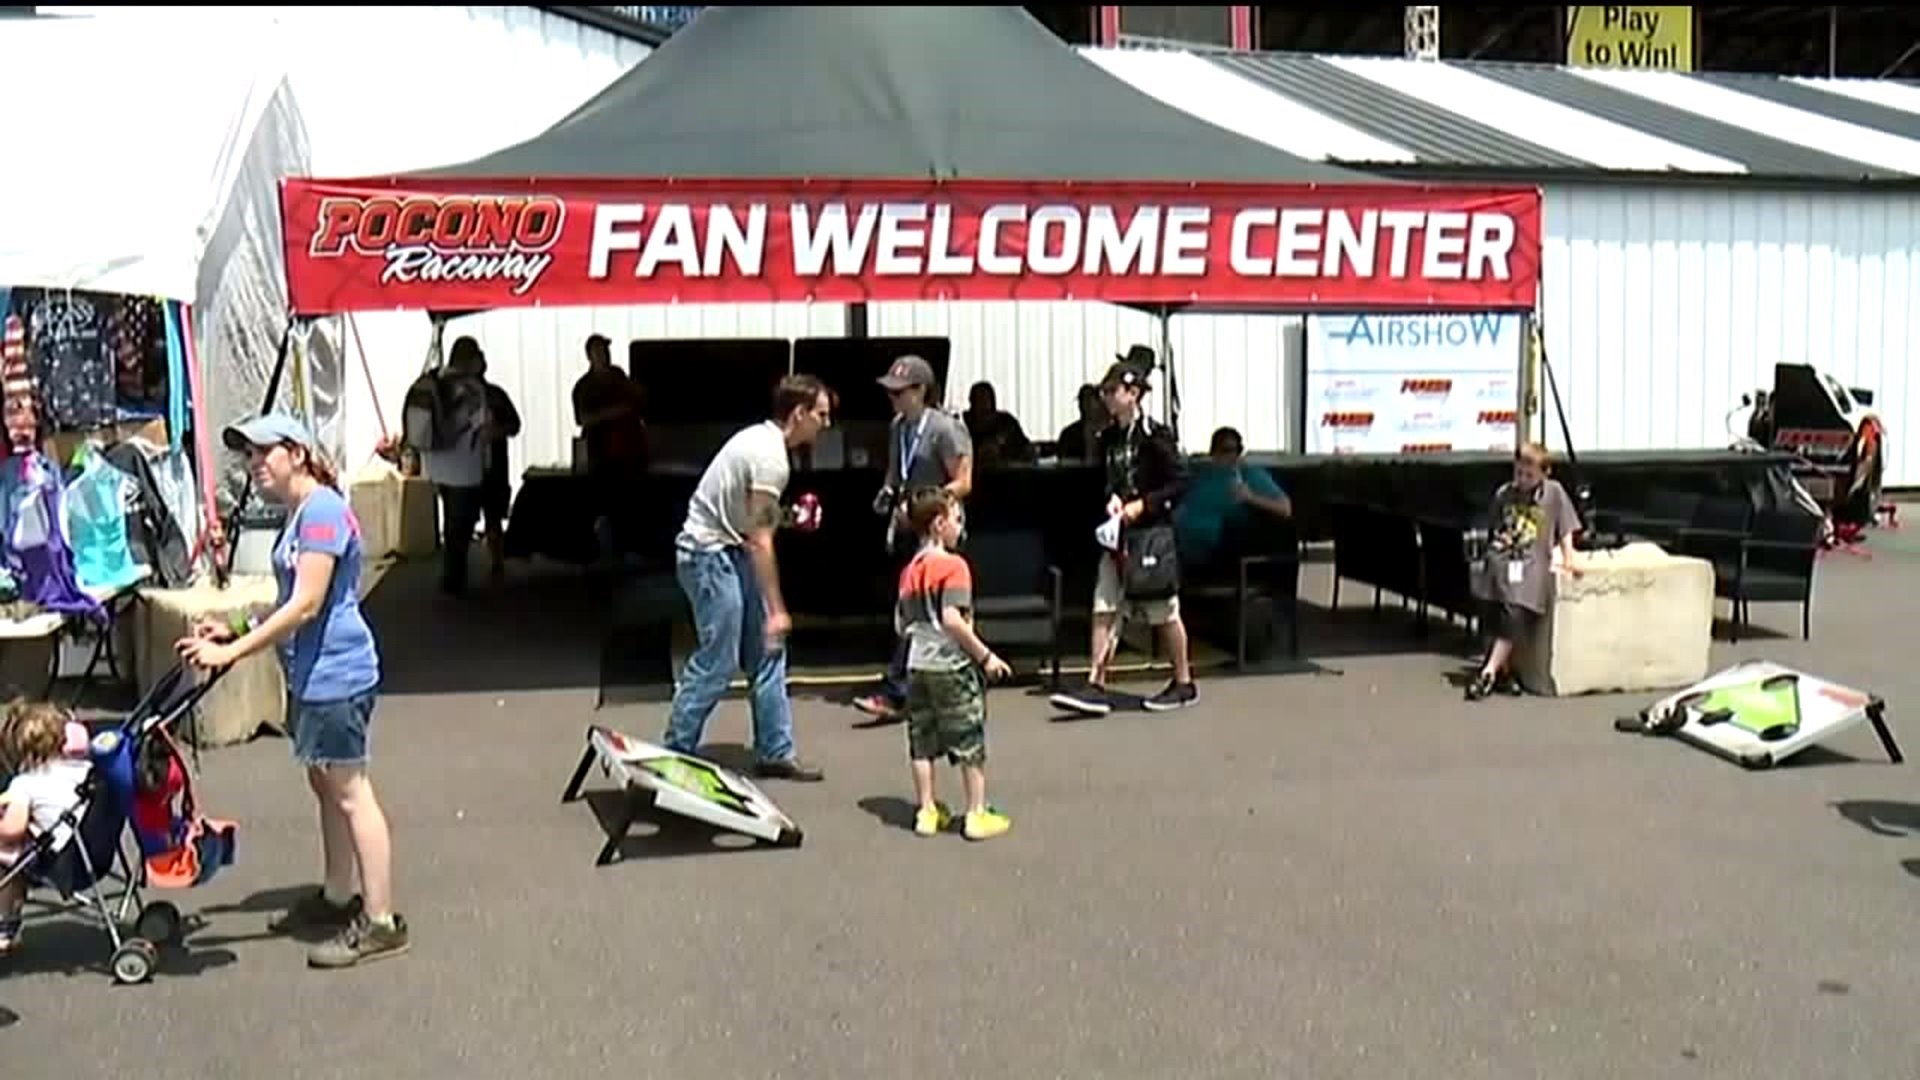 Fun for Kids and Adults at Pocono Raceway